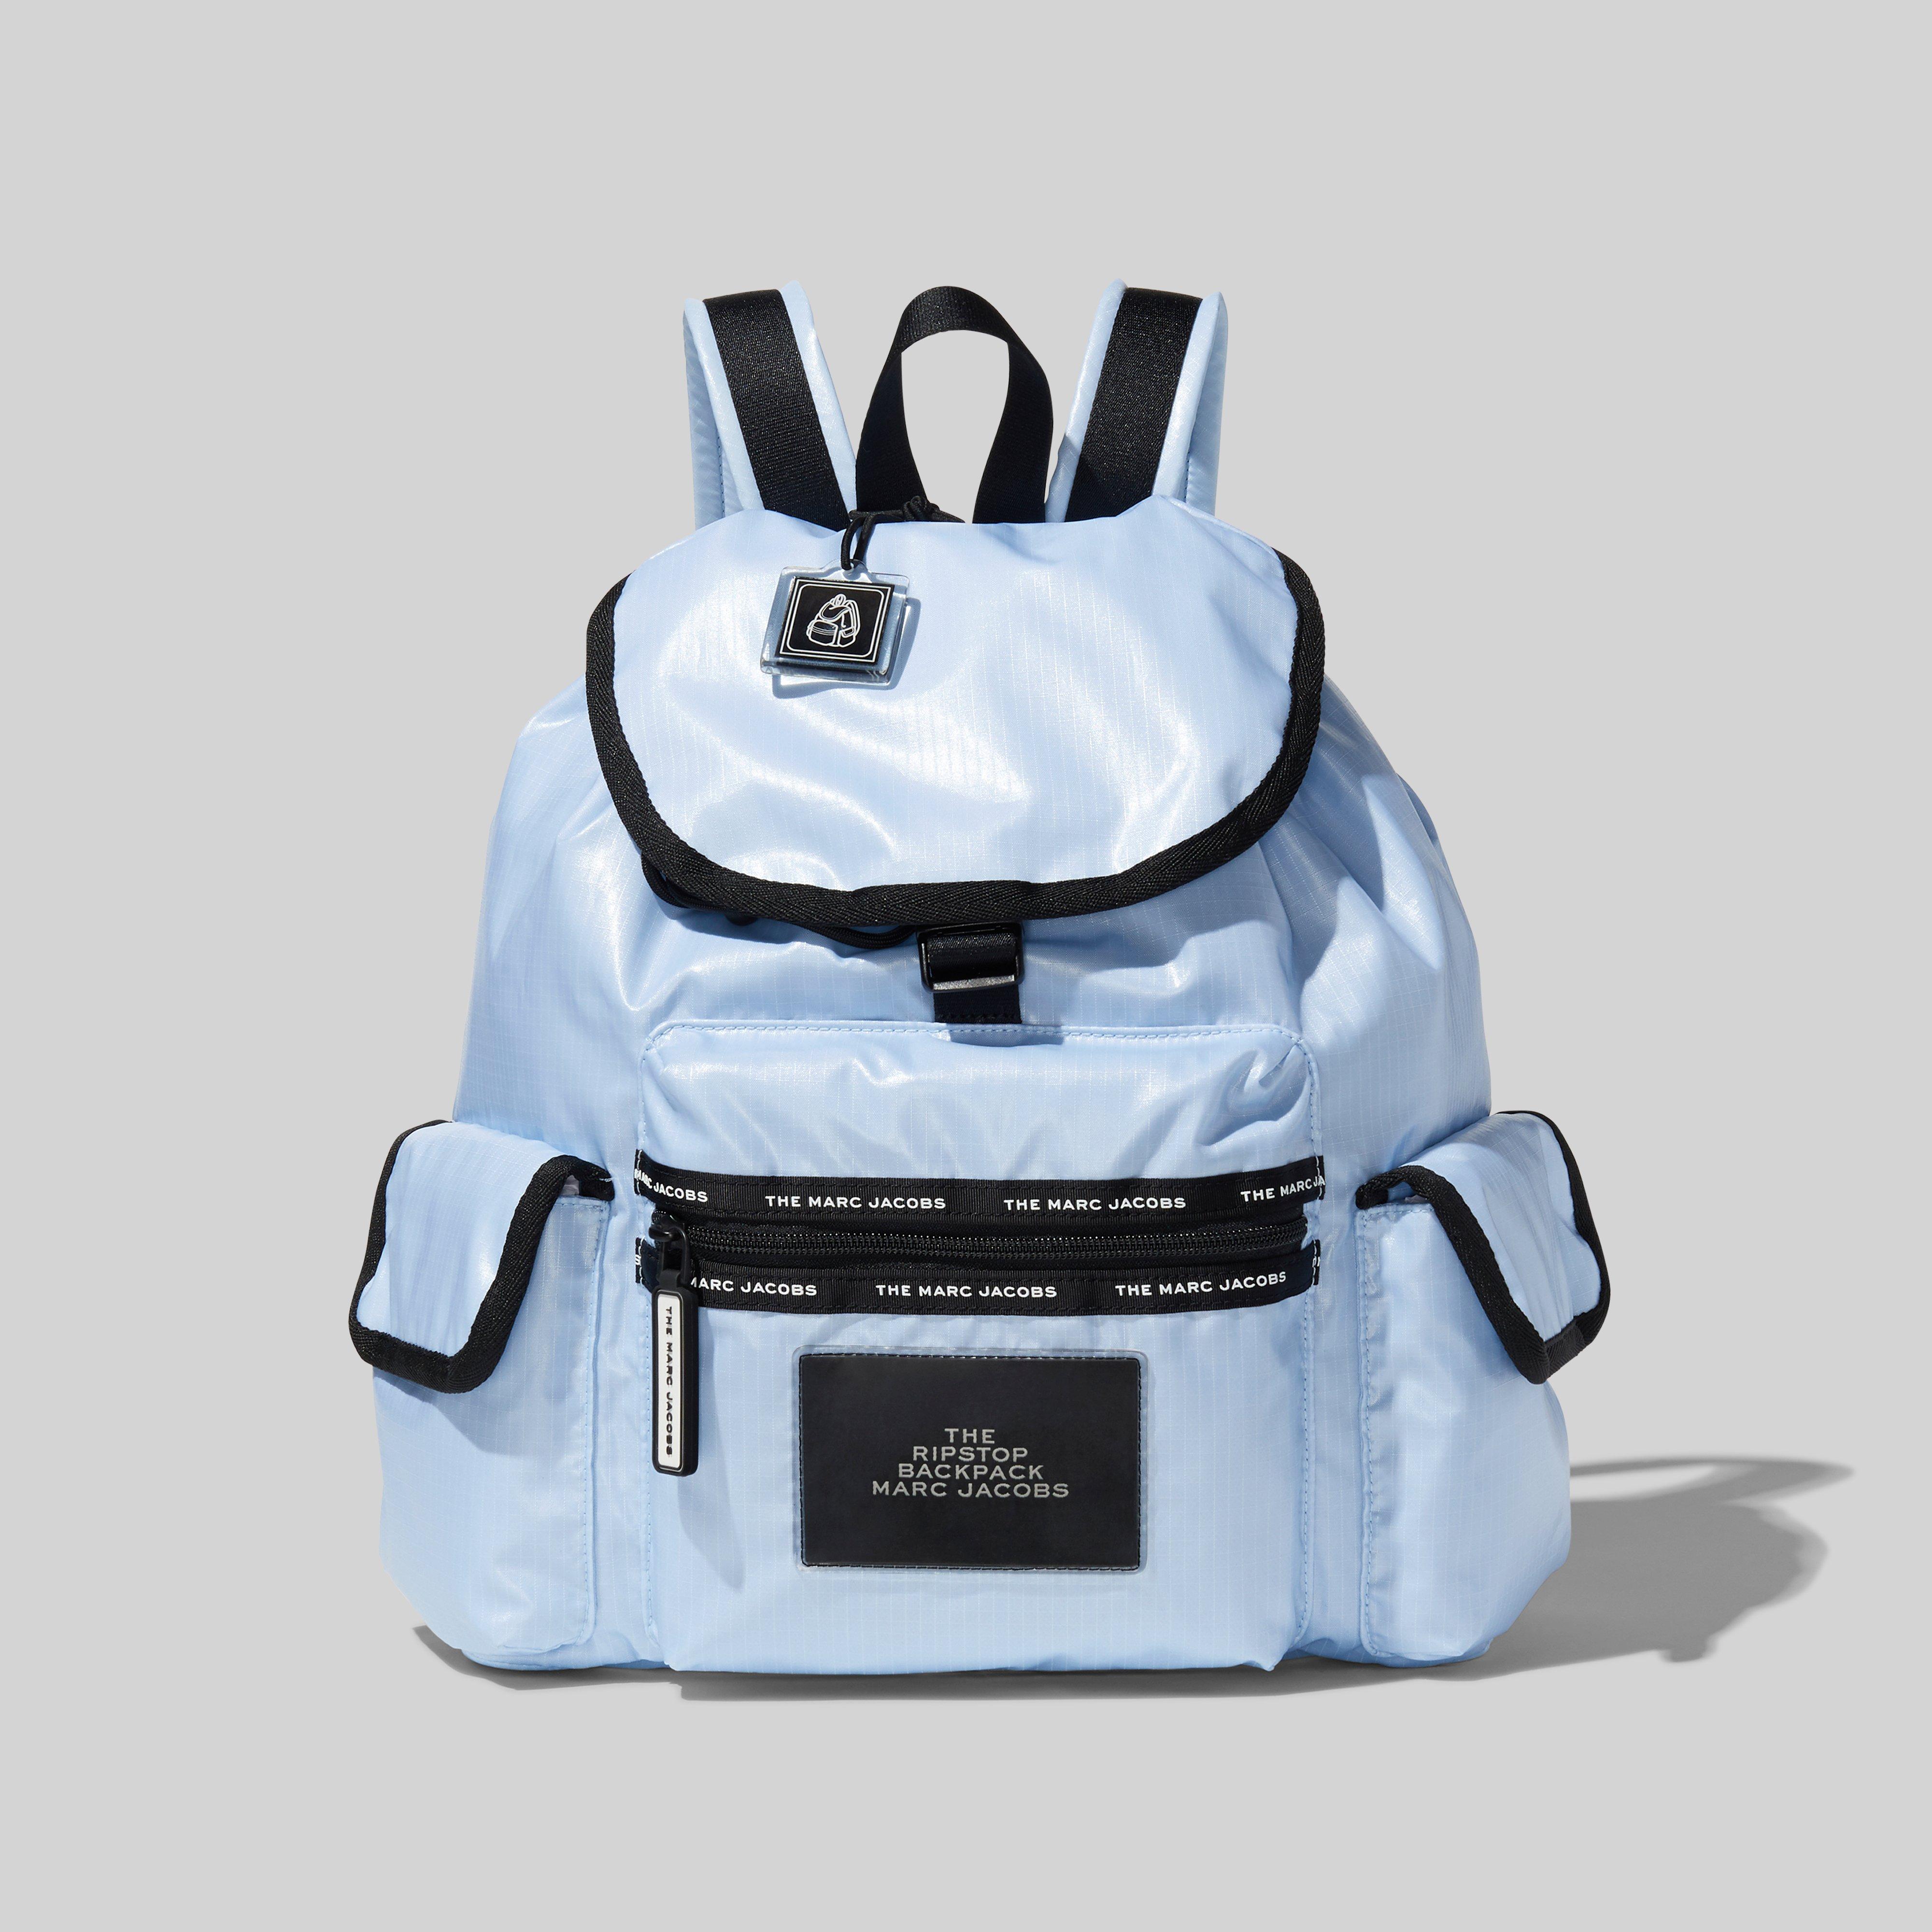 Marc Jacobs The Ripstop Backpack In Blue Mist